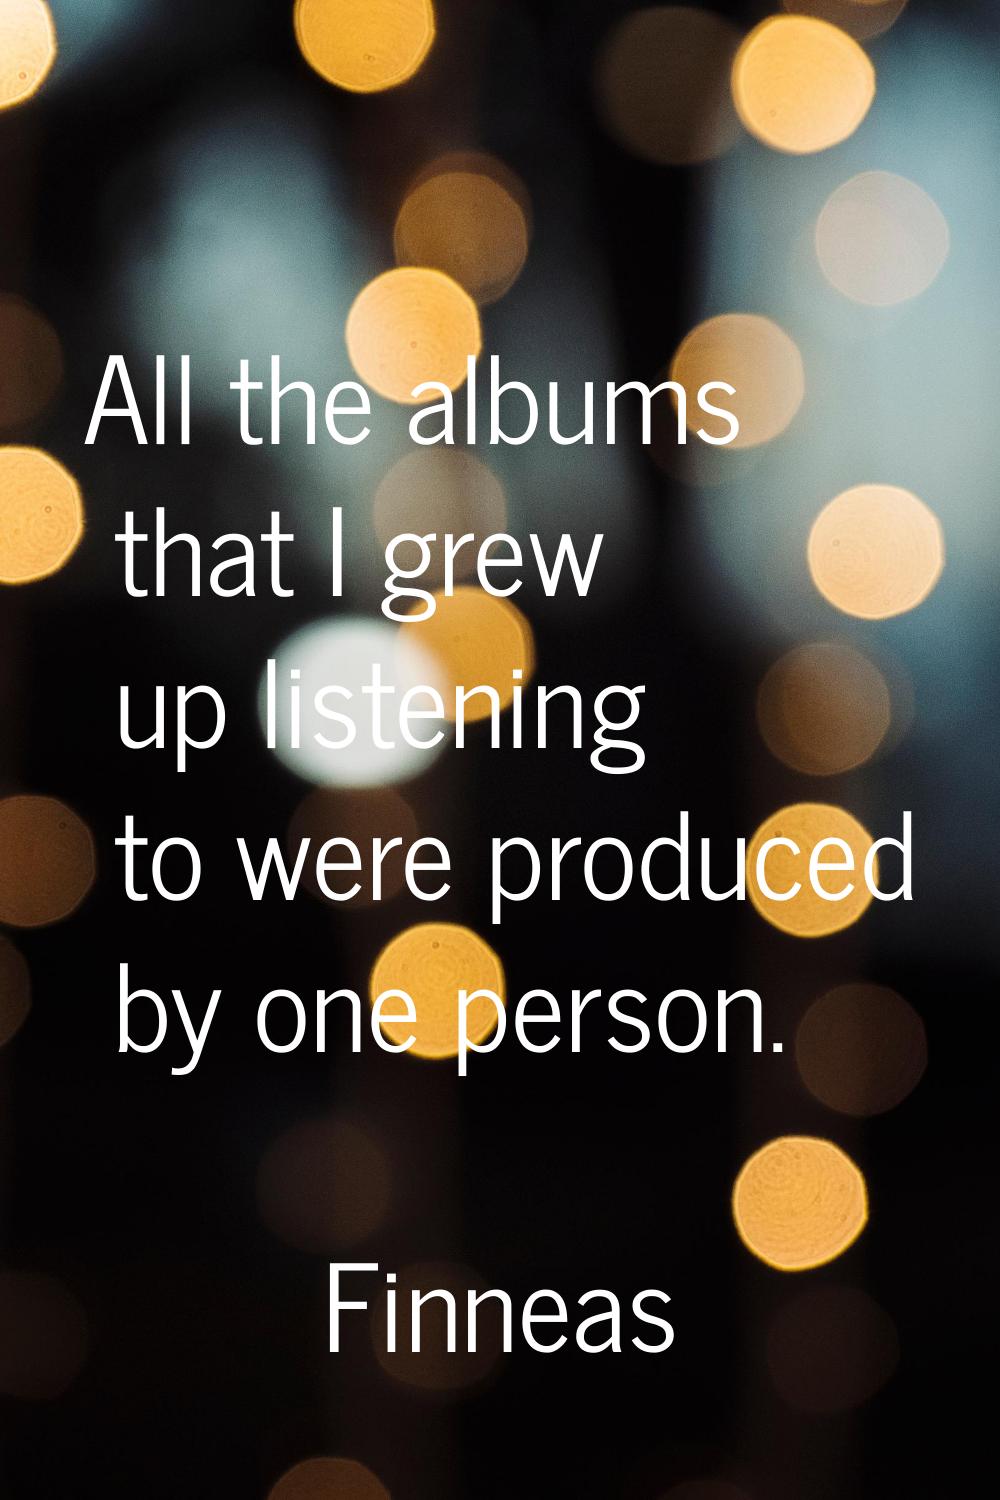 All the albums that I grew up listening to were produced by one person.